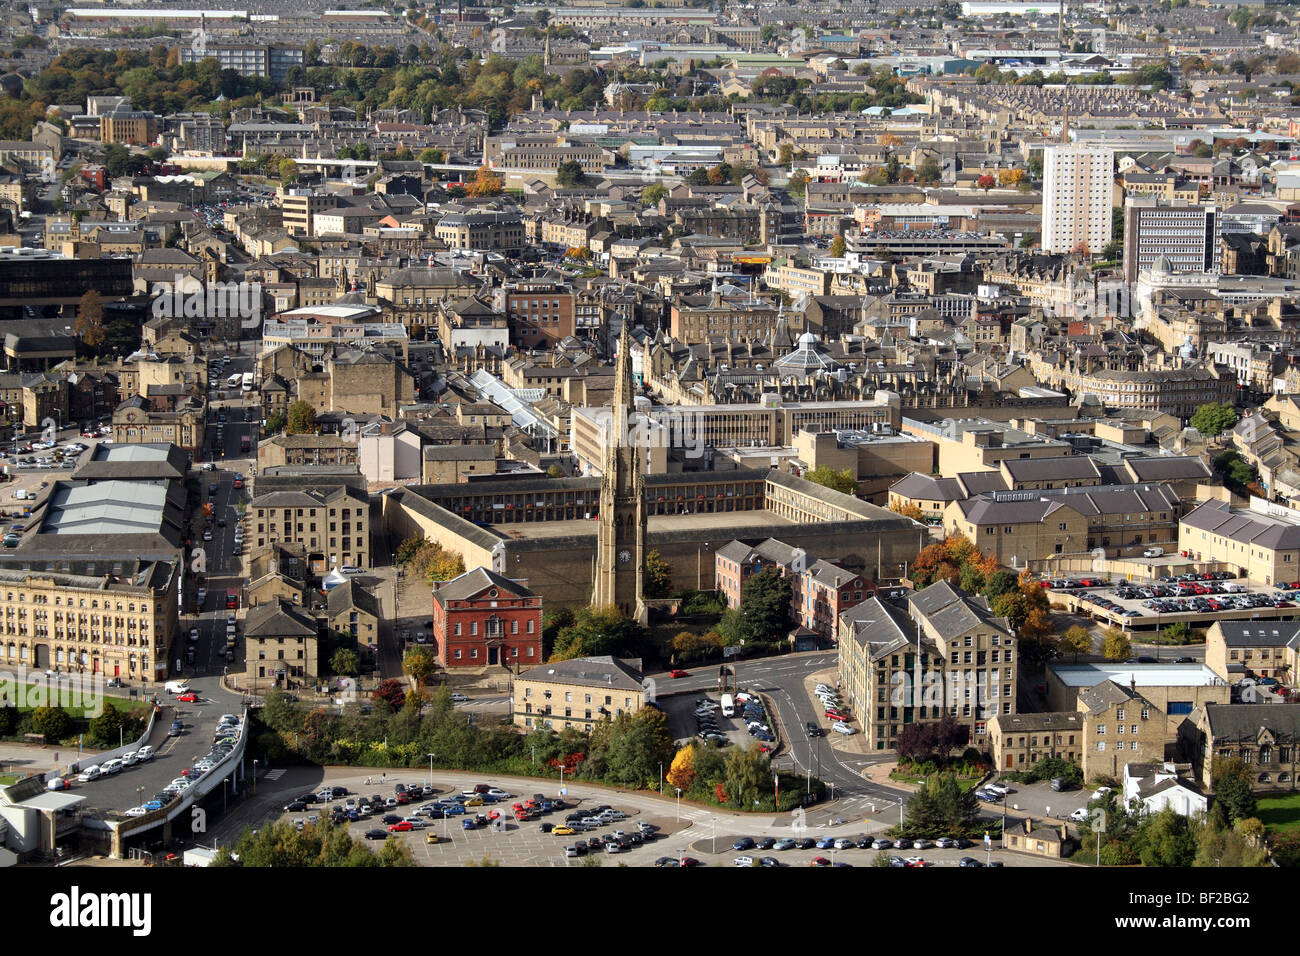 Halifax  Calderdale Yorkshire UK City Scape Panorama showing Piece Hall and The Square Church Spire Stock Photo